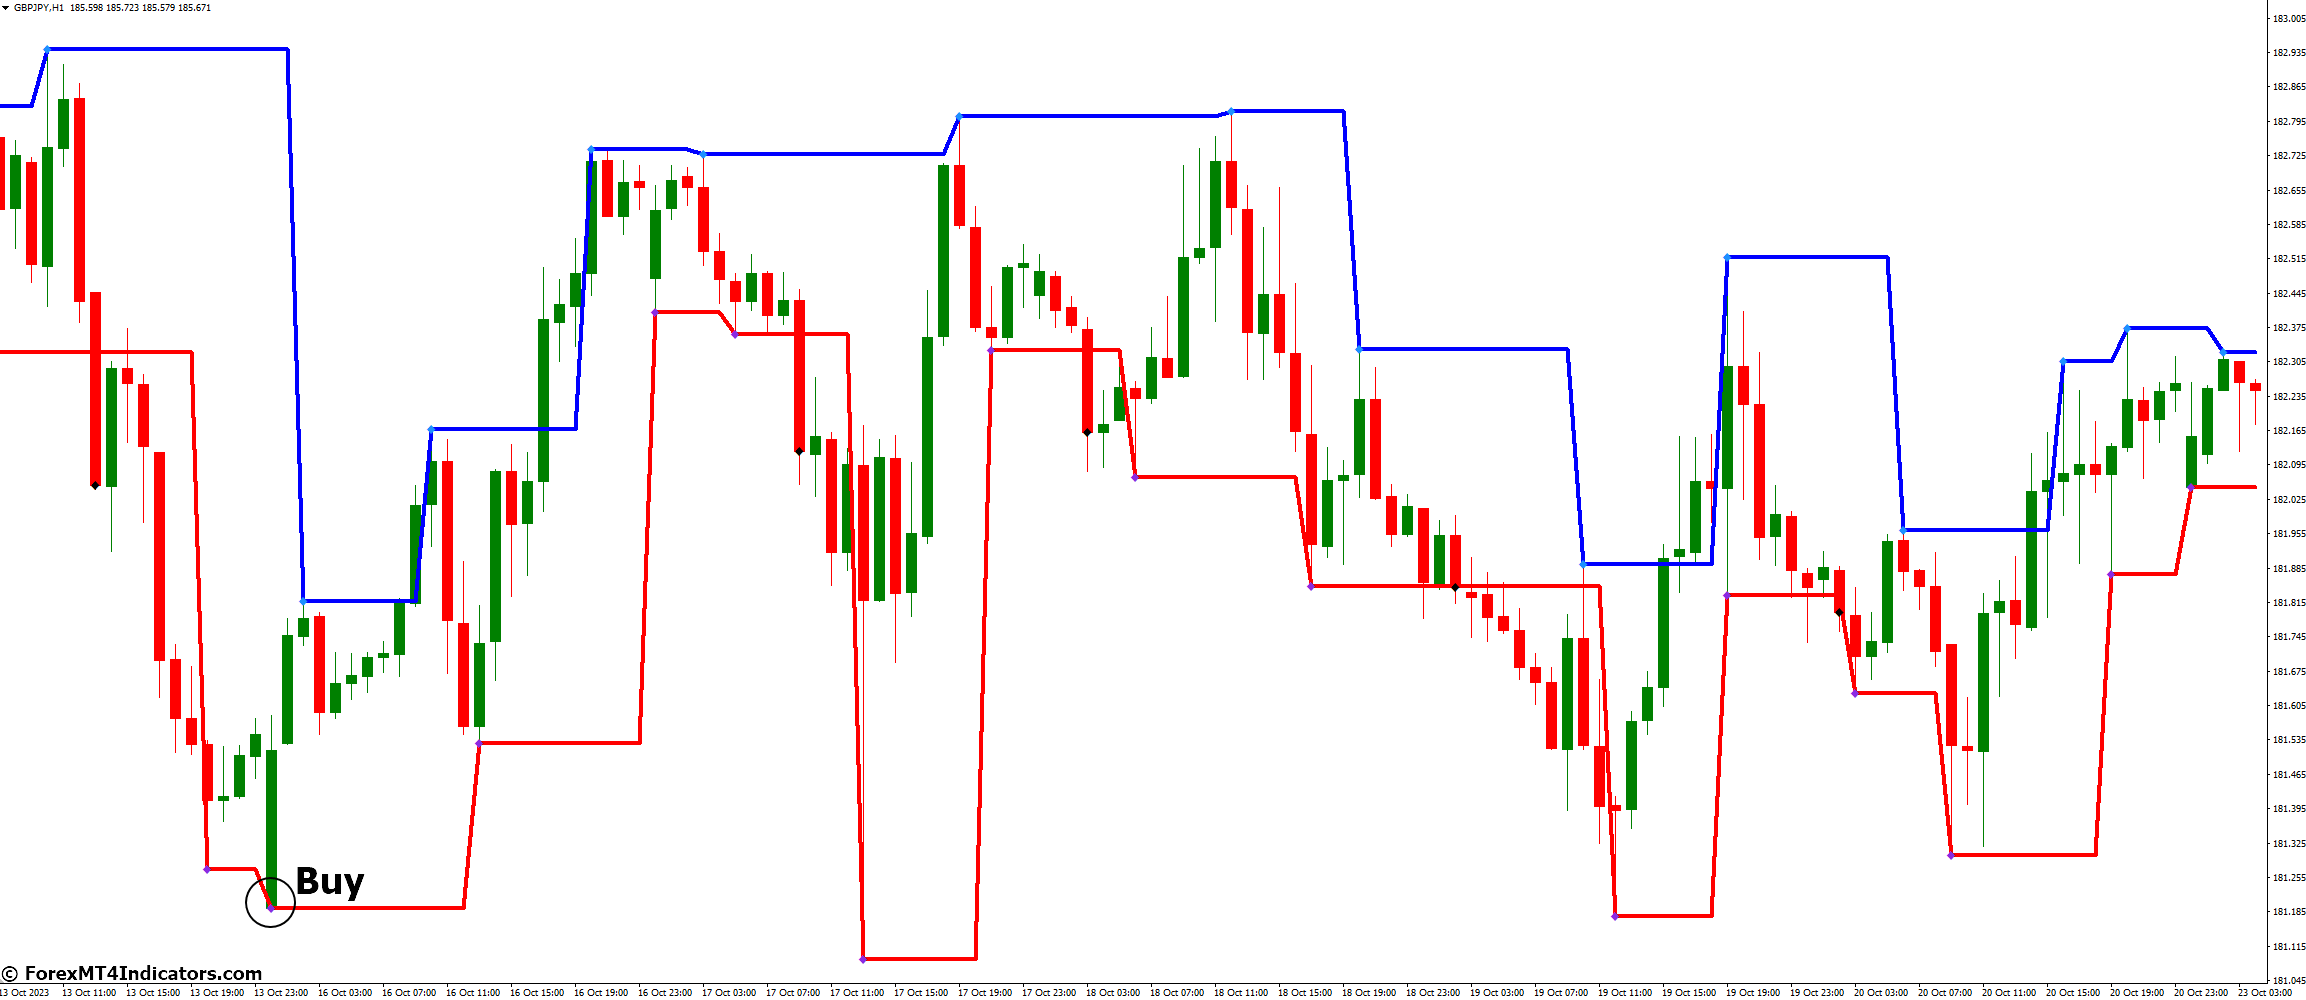 How to Trade with Fractal Levels Indicator - Buy Entry